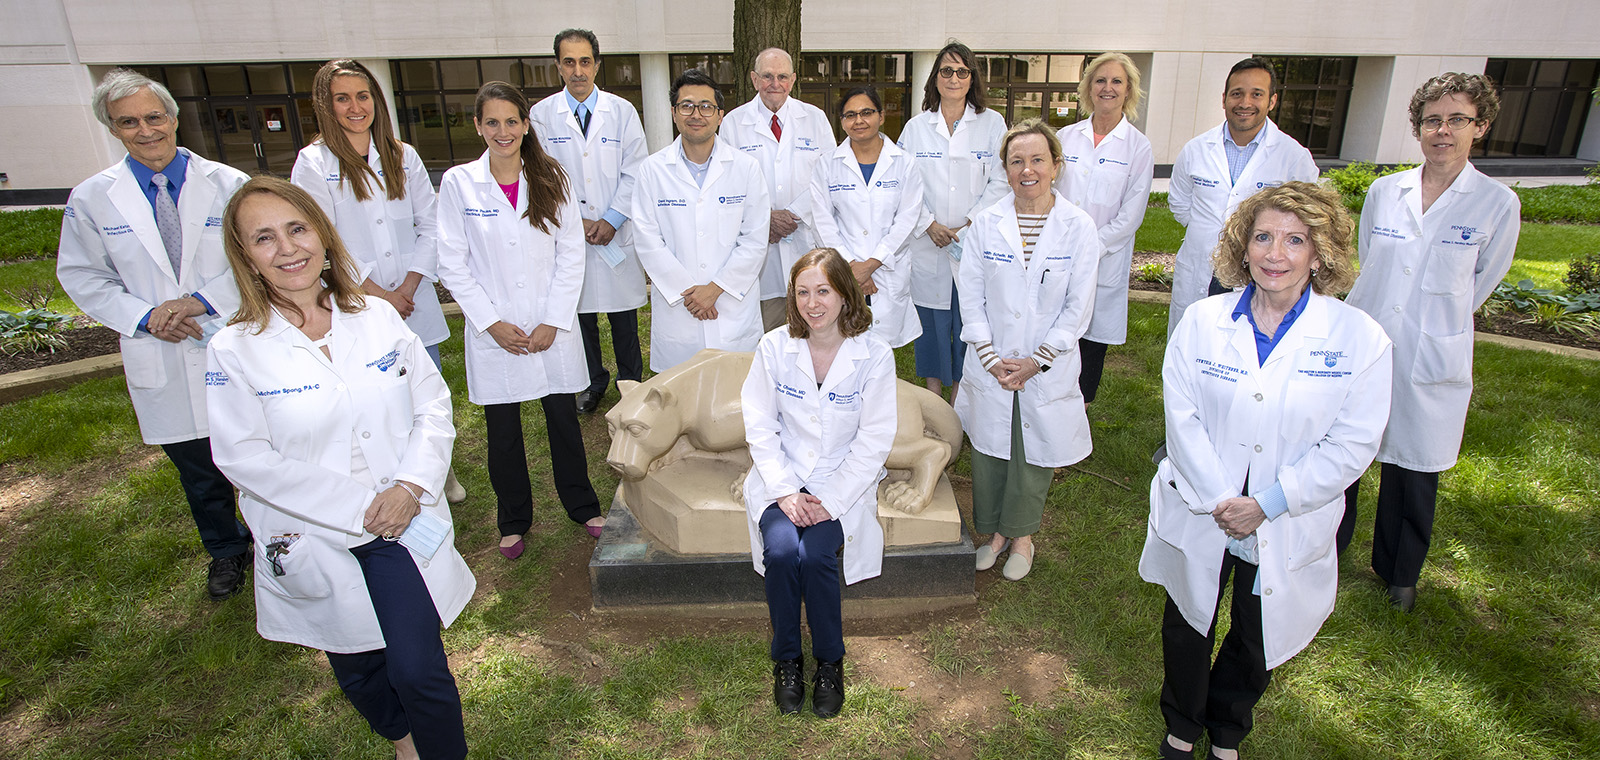 Fifteen members of the Division of Infectious Diseases and Epidemiology, all wearing white coats, gather for a group photo outside on the campus of Penn State College of Medicine.